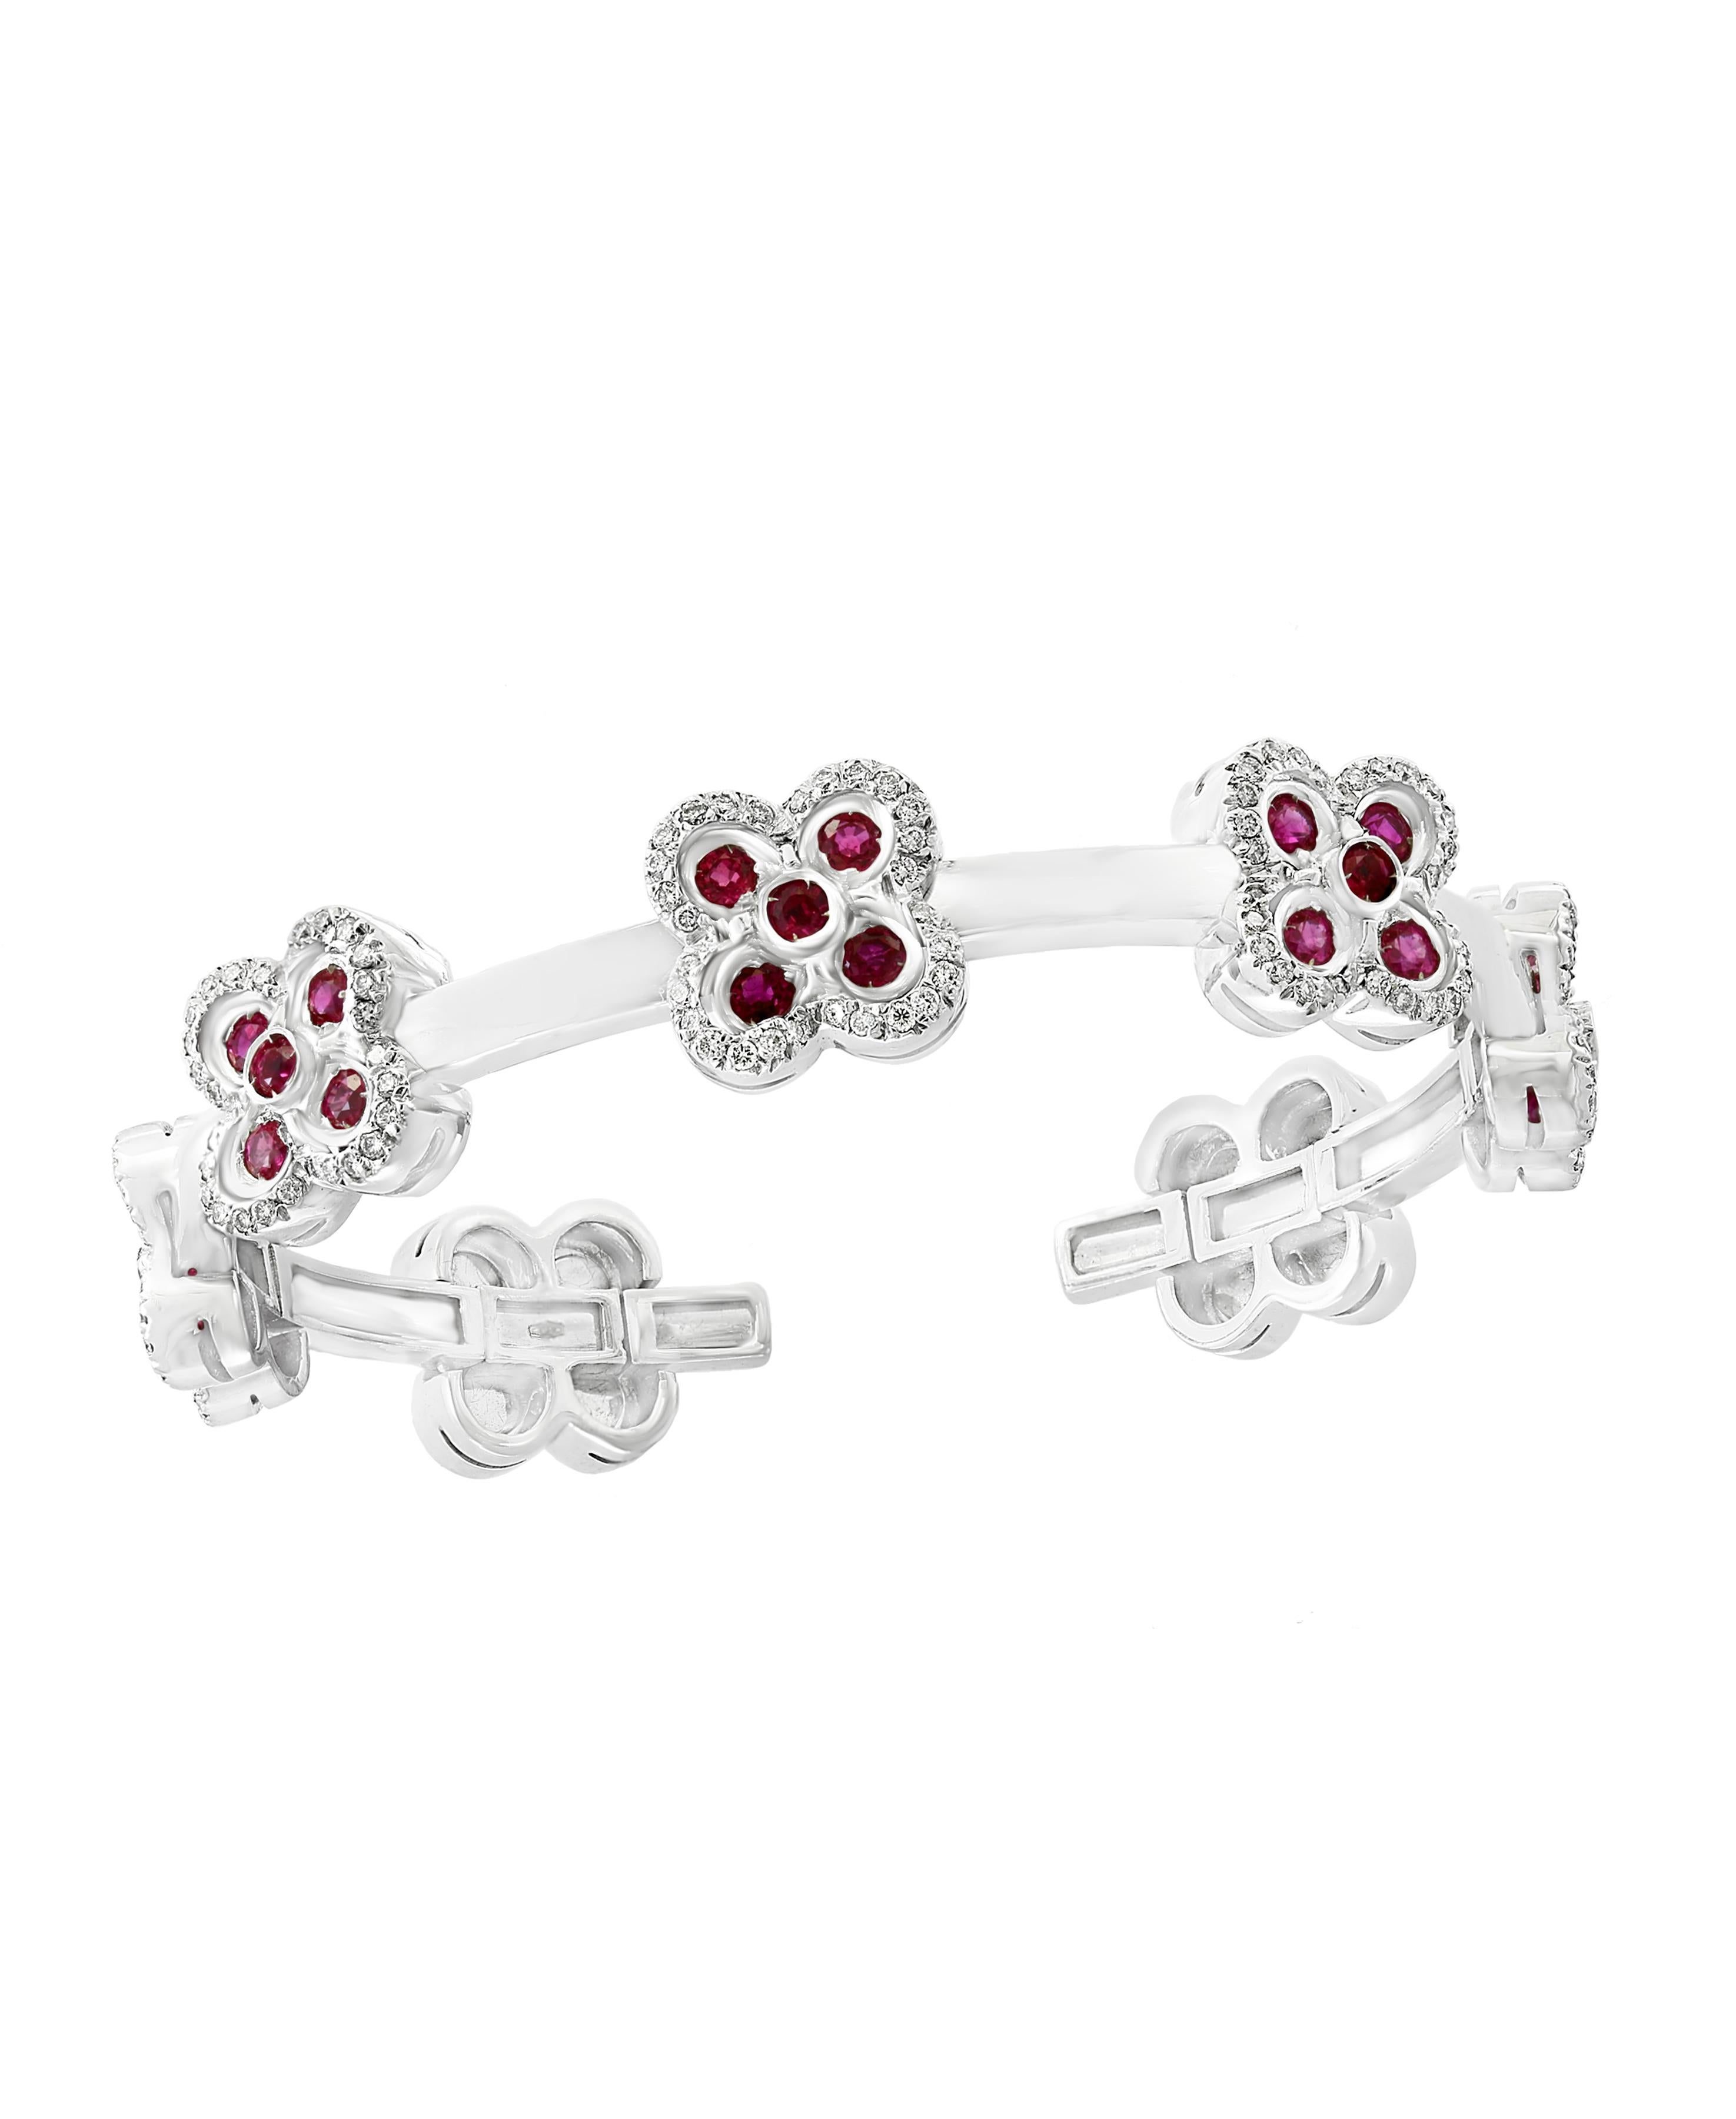 Ruby & Diamond & Gold 37 Grams Cuff Bangle /Bracelet In 18 Karat White Gold
It features a bangle style Bracelet crafted from an 18 Karat White gold and embedded with 7 Flowers out of which 5 flowers have Ruby petals surrounded by round brilliant